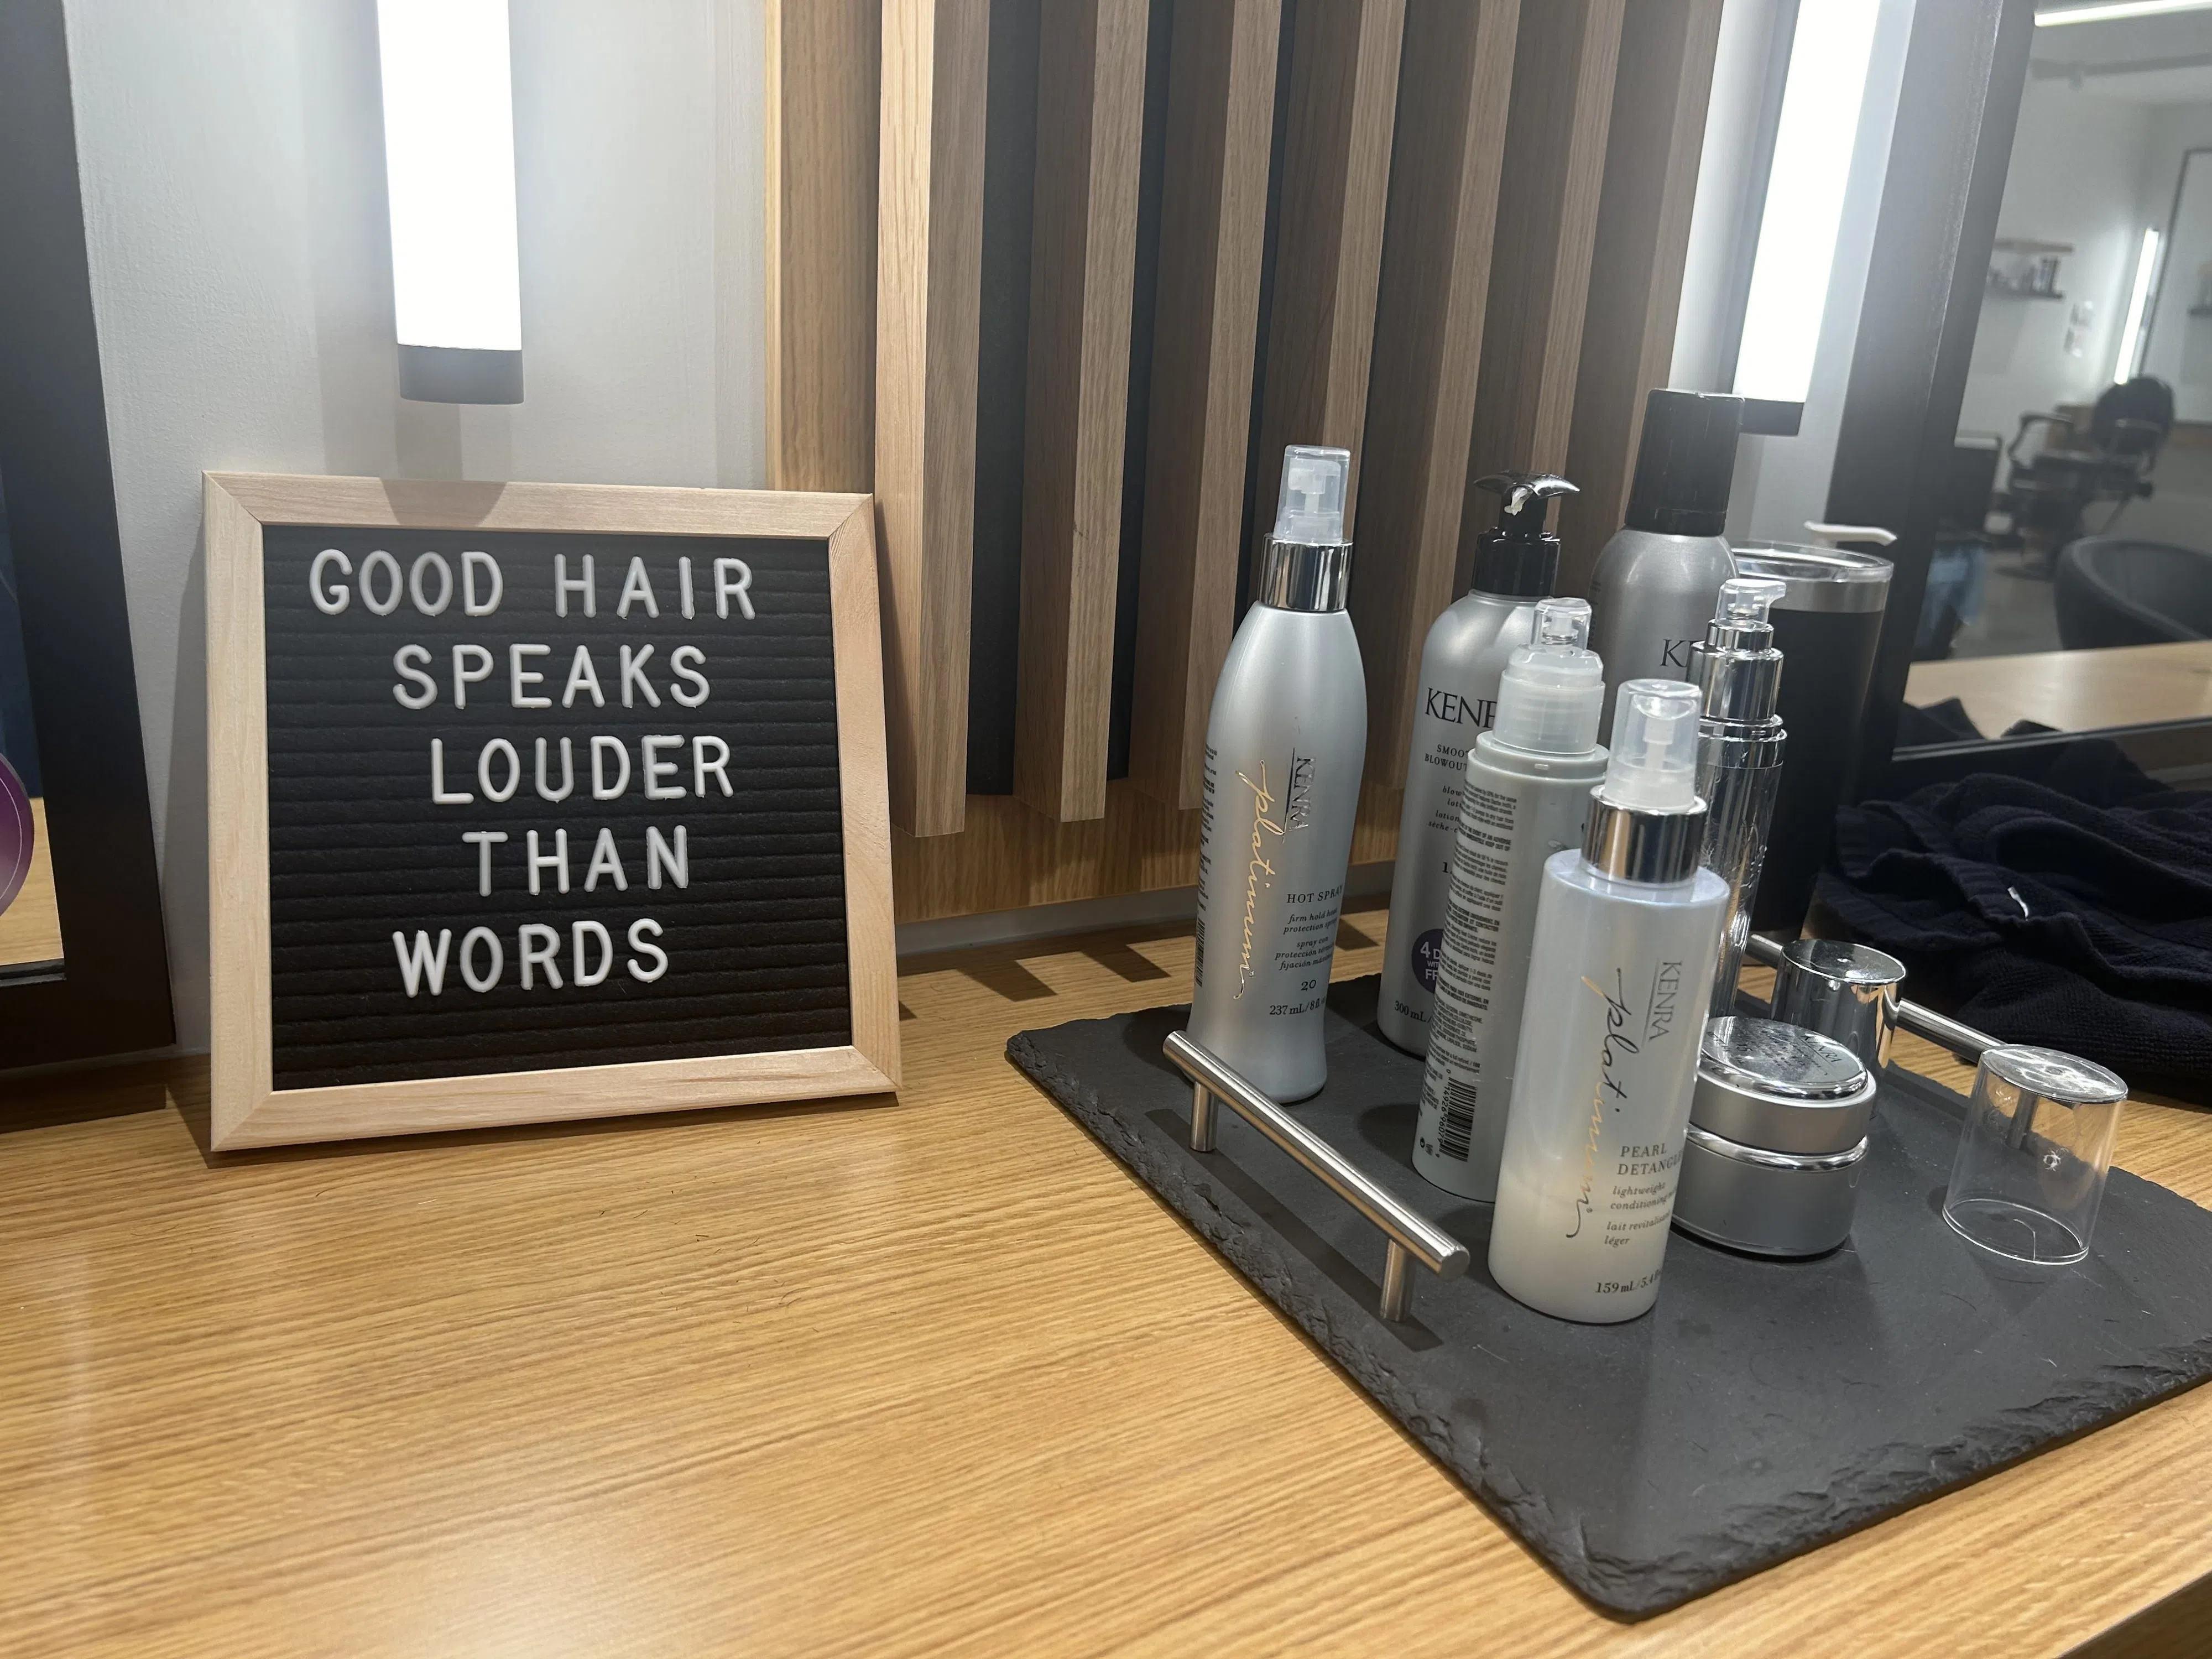 Fanshawe's Hair Salon inclusive to all students for haircut or hangout